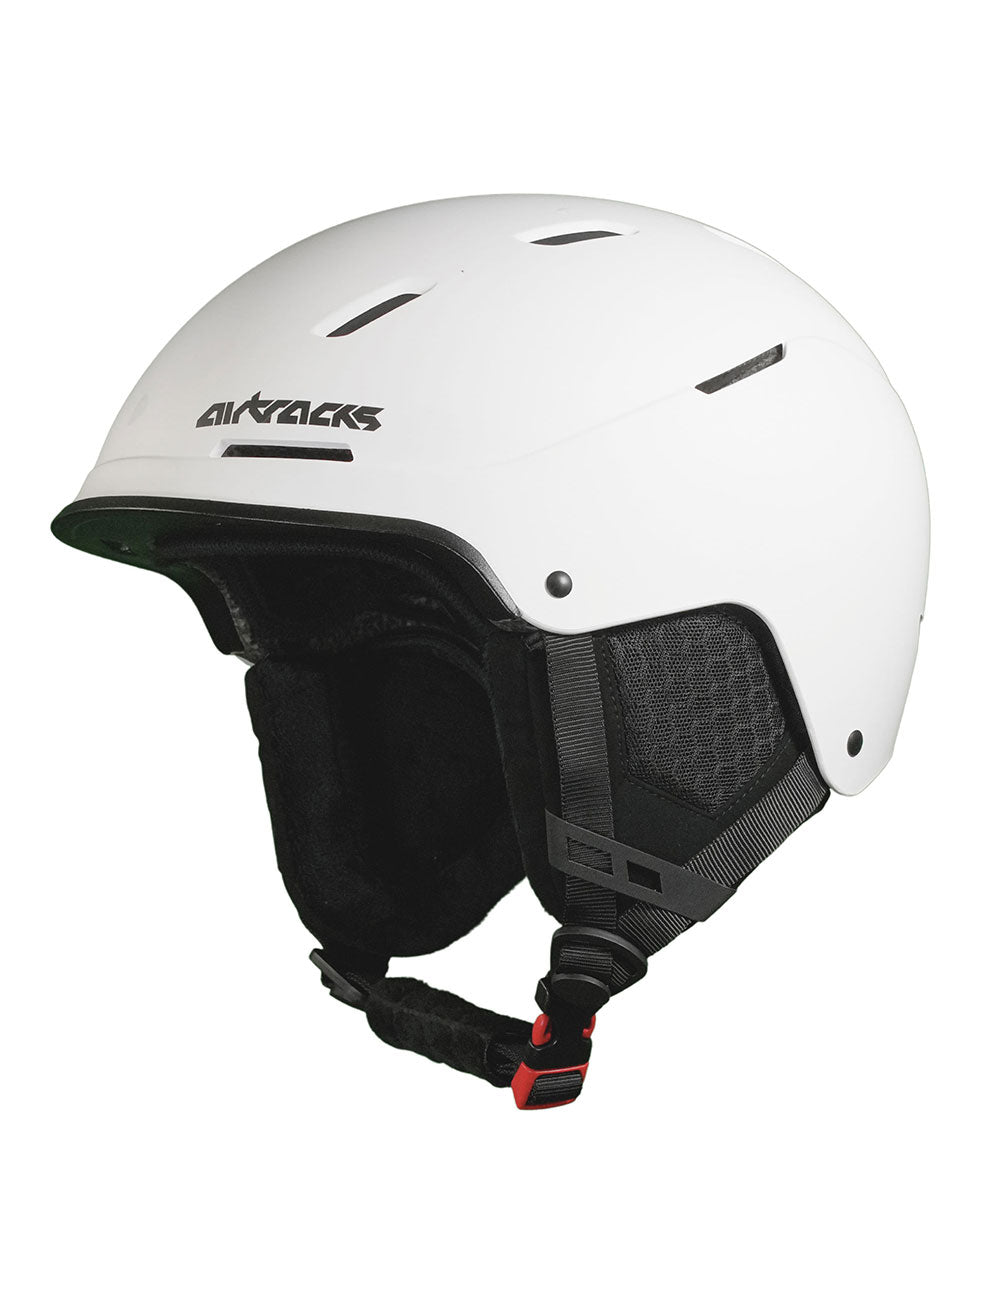 Strong_SB_Helm_sps2102_1300_4